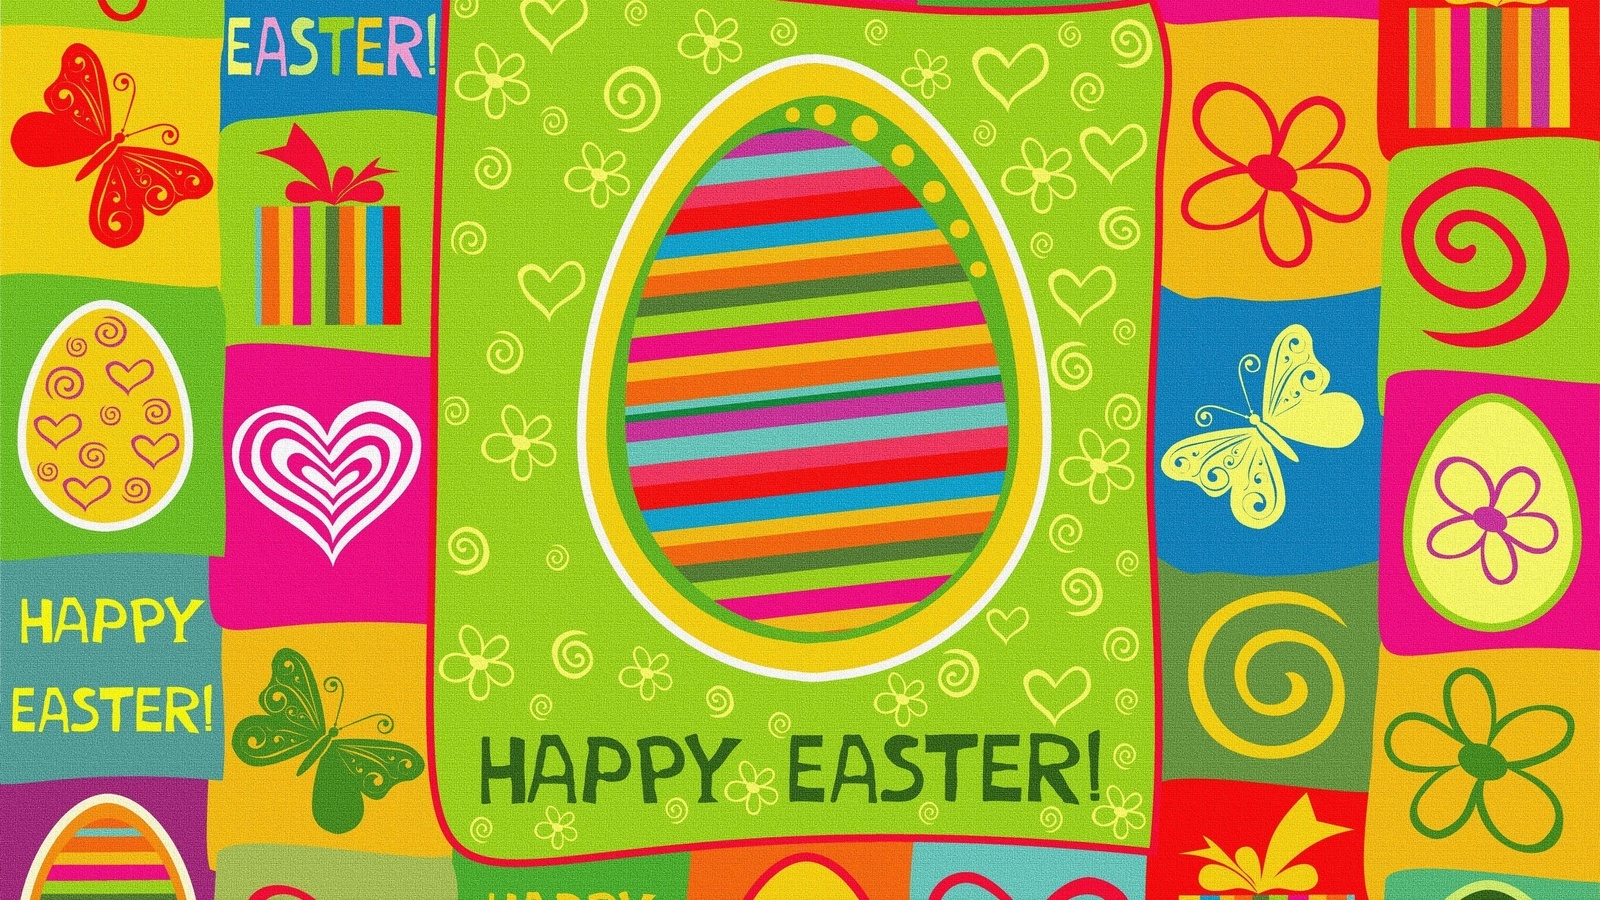 easter, holidays, background, green cellphone